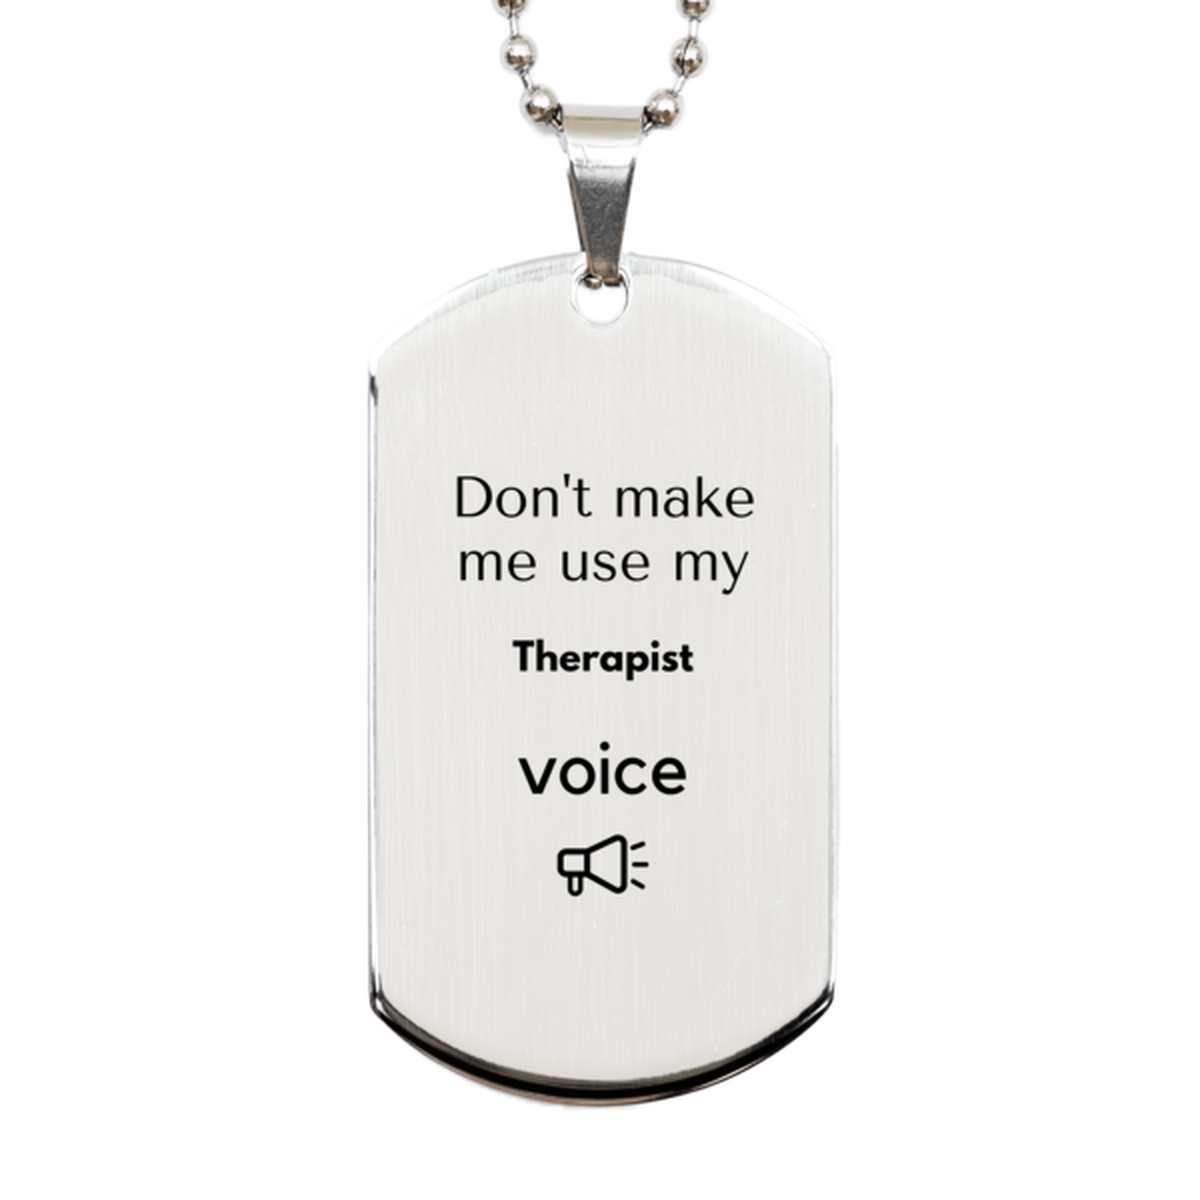 Don't make me use my Therapist voice, Sarcasm Therapist Gifts, Christmas Therapist Silver Dog Tag Birthday Unique Gifts For Therapist Coworkers, Men, Women, Colleague, Friends